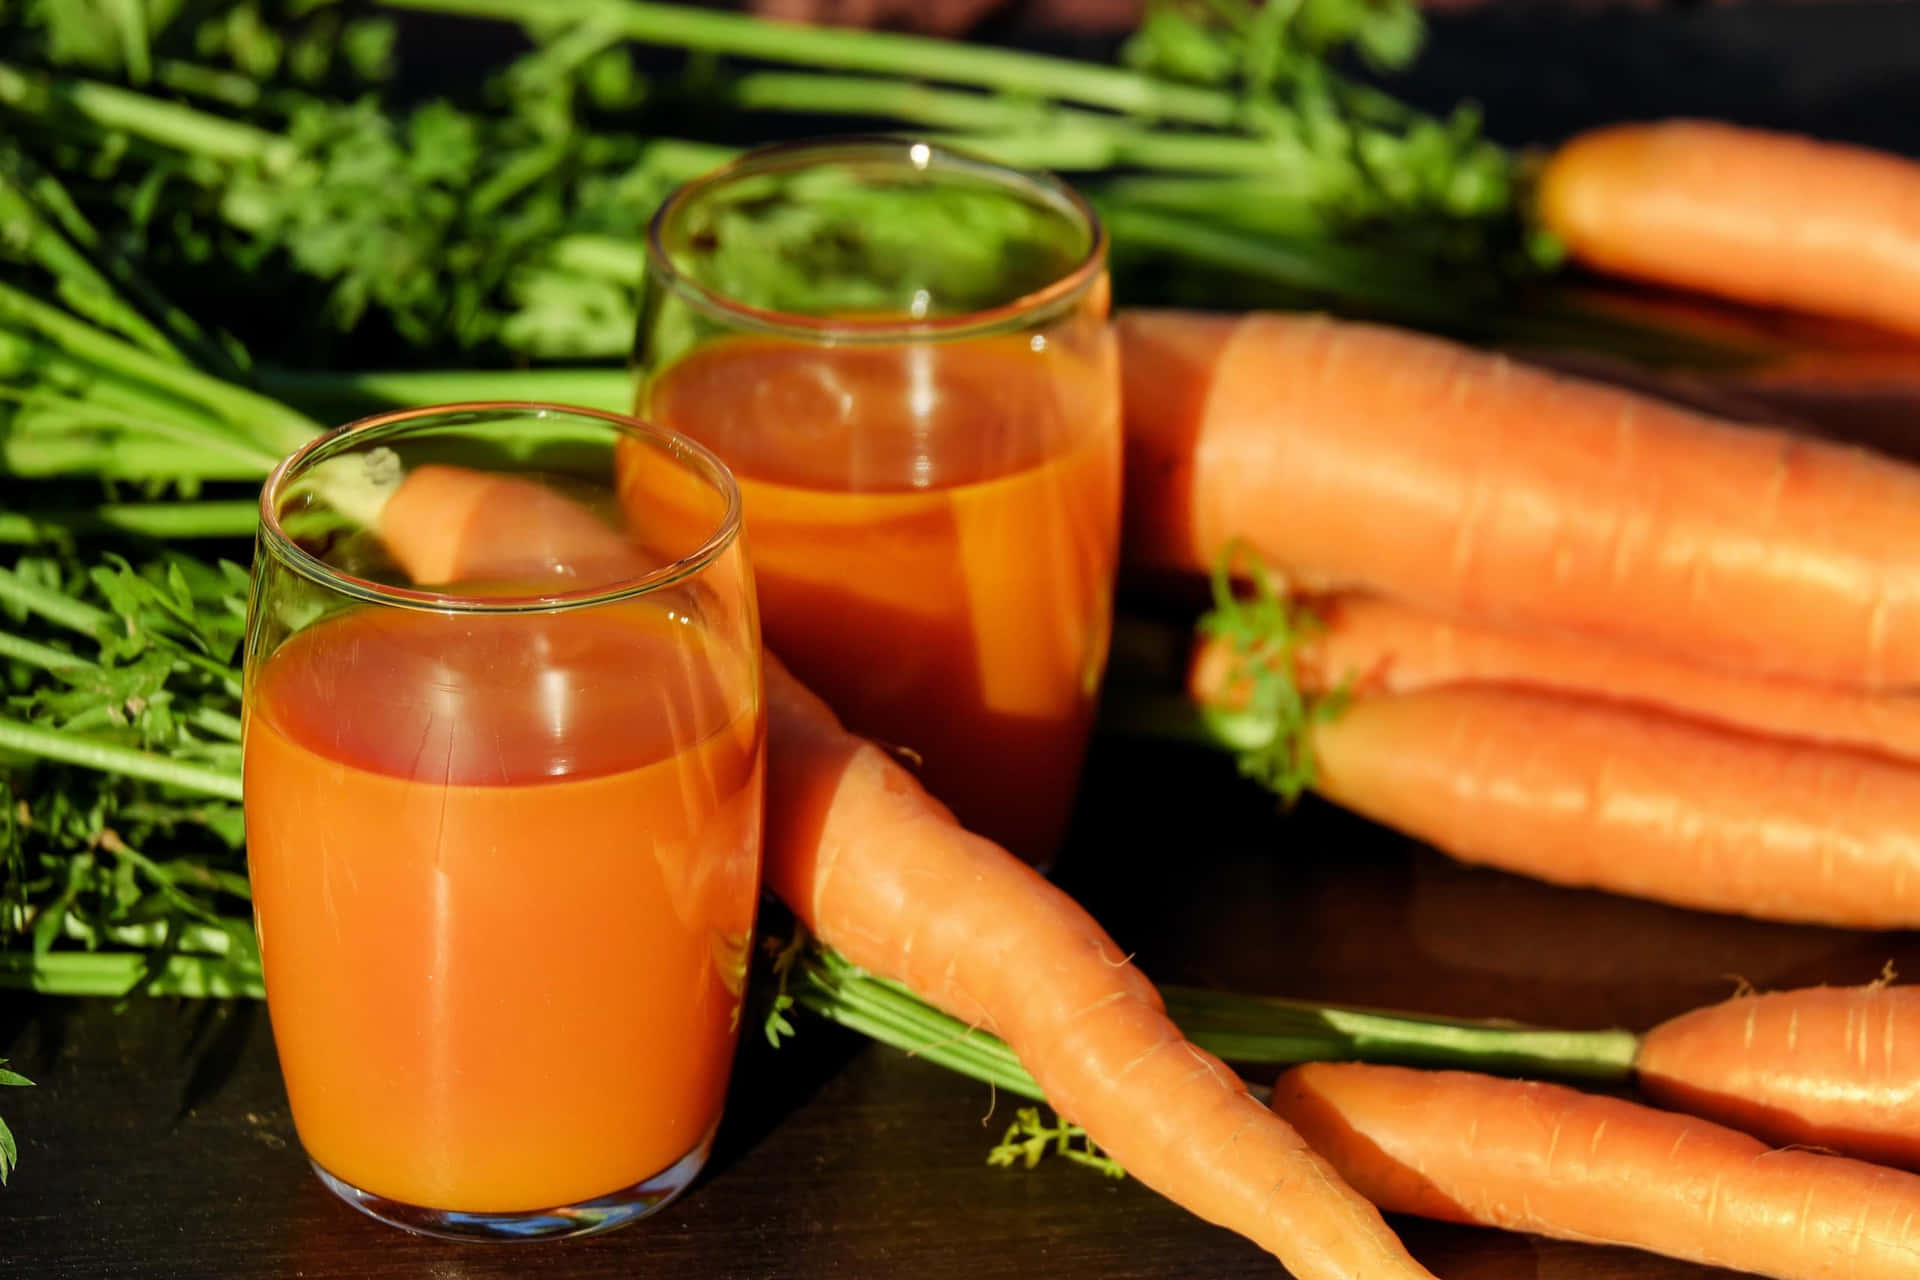 Carrot Juice And Glasses Of Water On A Table